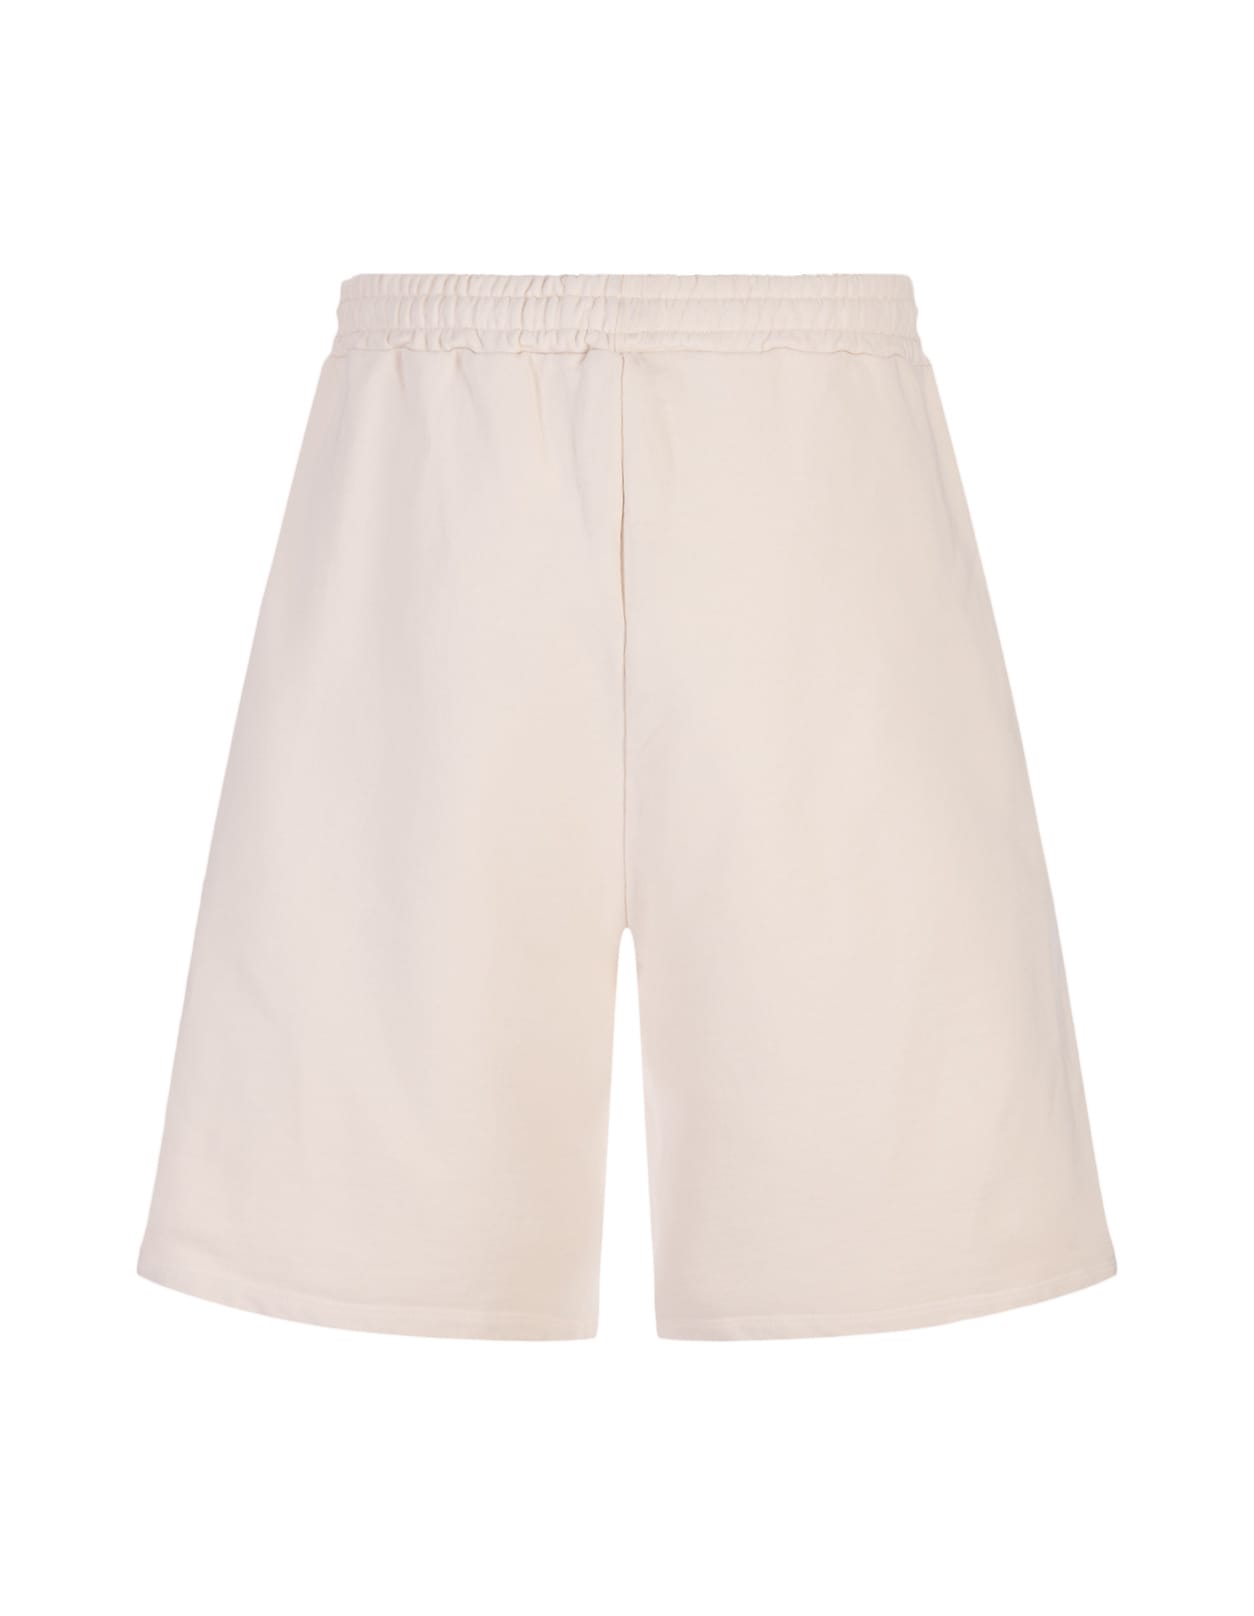 Shop Barrow Taupe Bermuda Shorts With Lettering Prints. In Turtledove